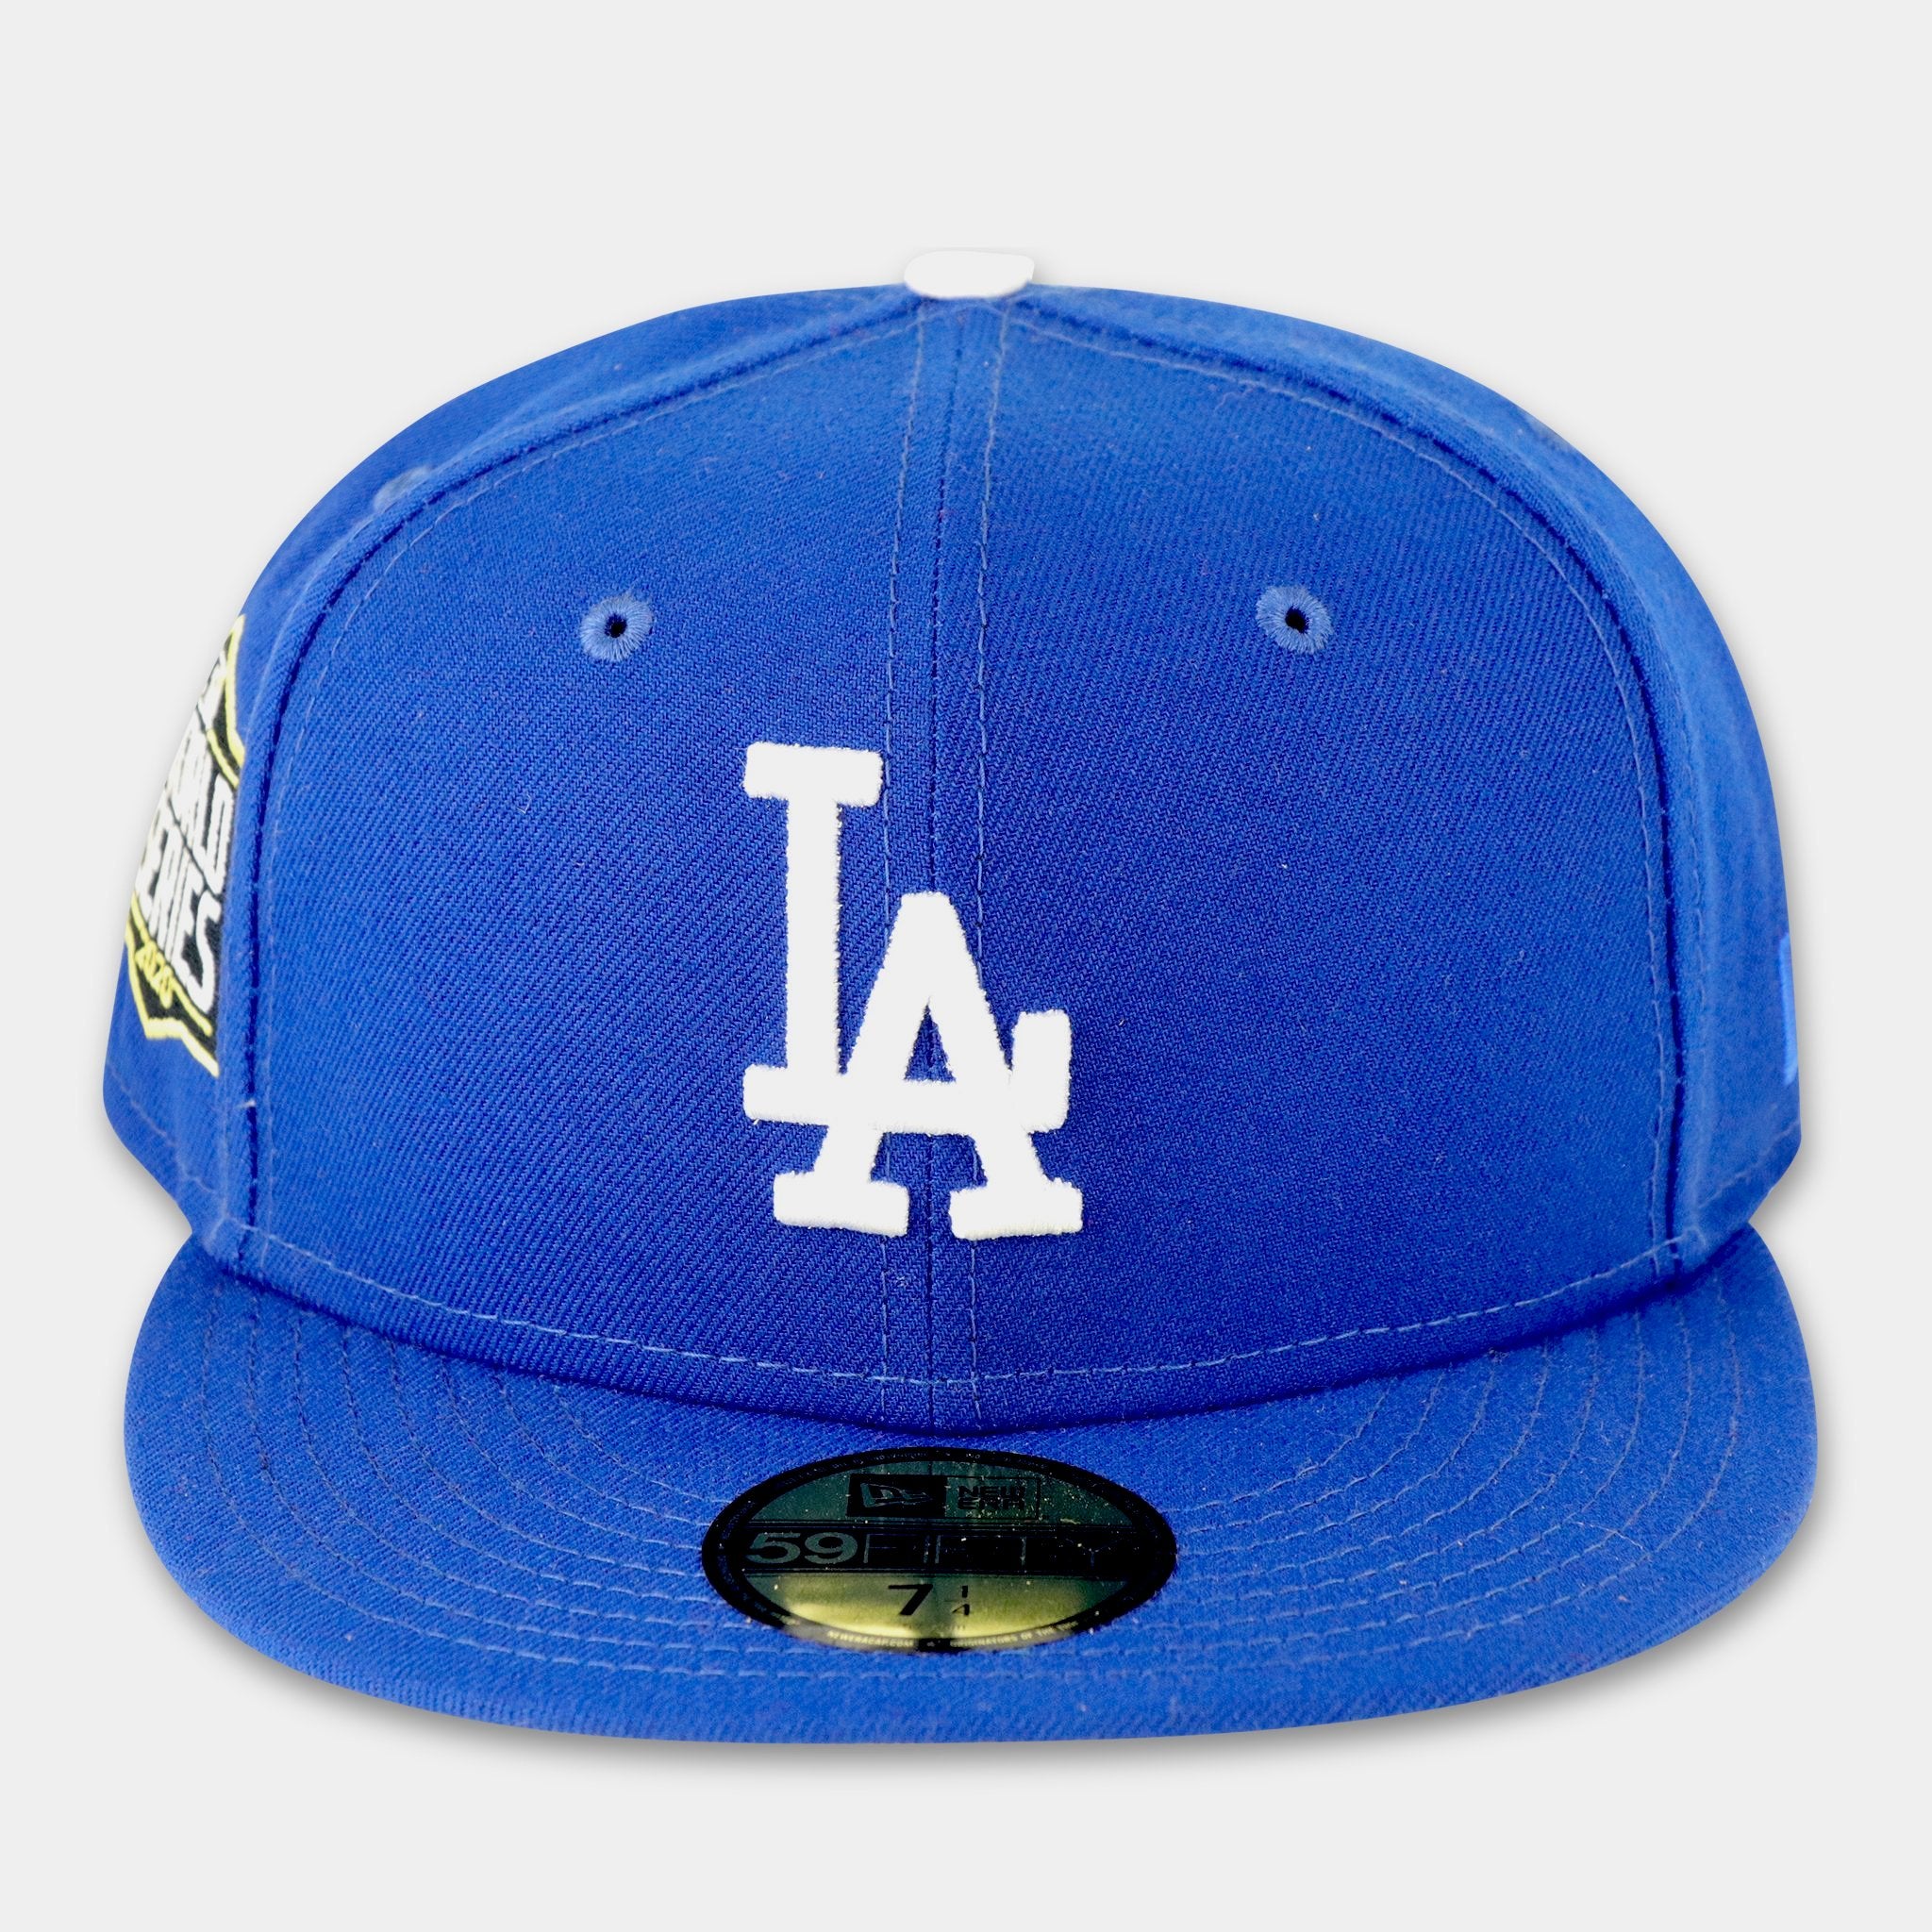 LOS ANGELES DODGERS "2020 WORLDSERIES" NEW ERA 59FIFTY FITTED (YELLOW BOTTOM)